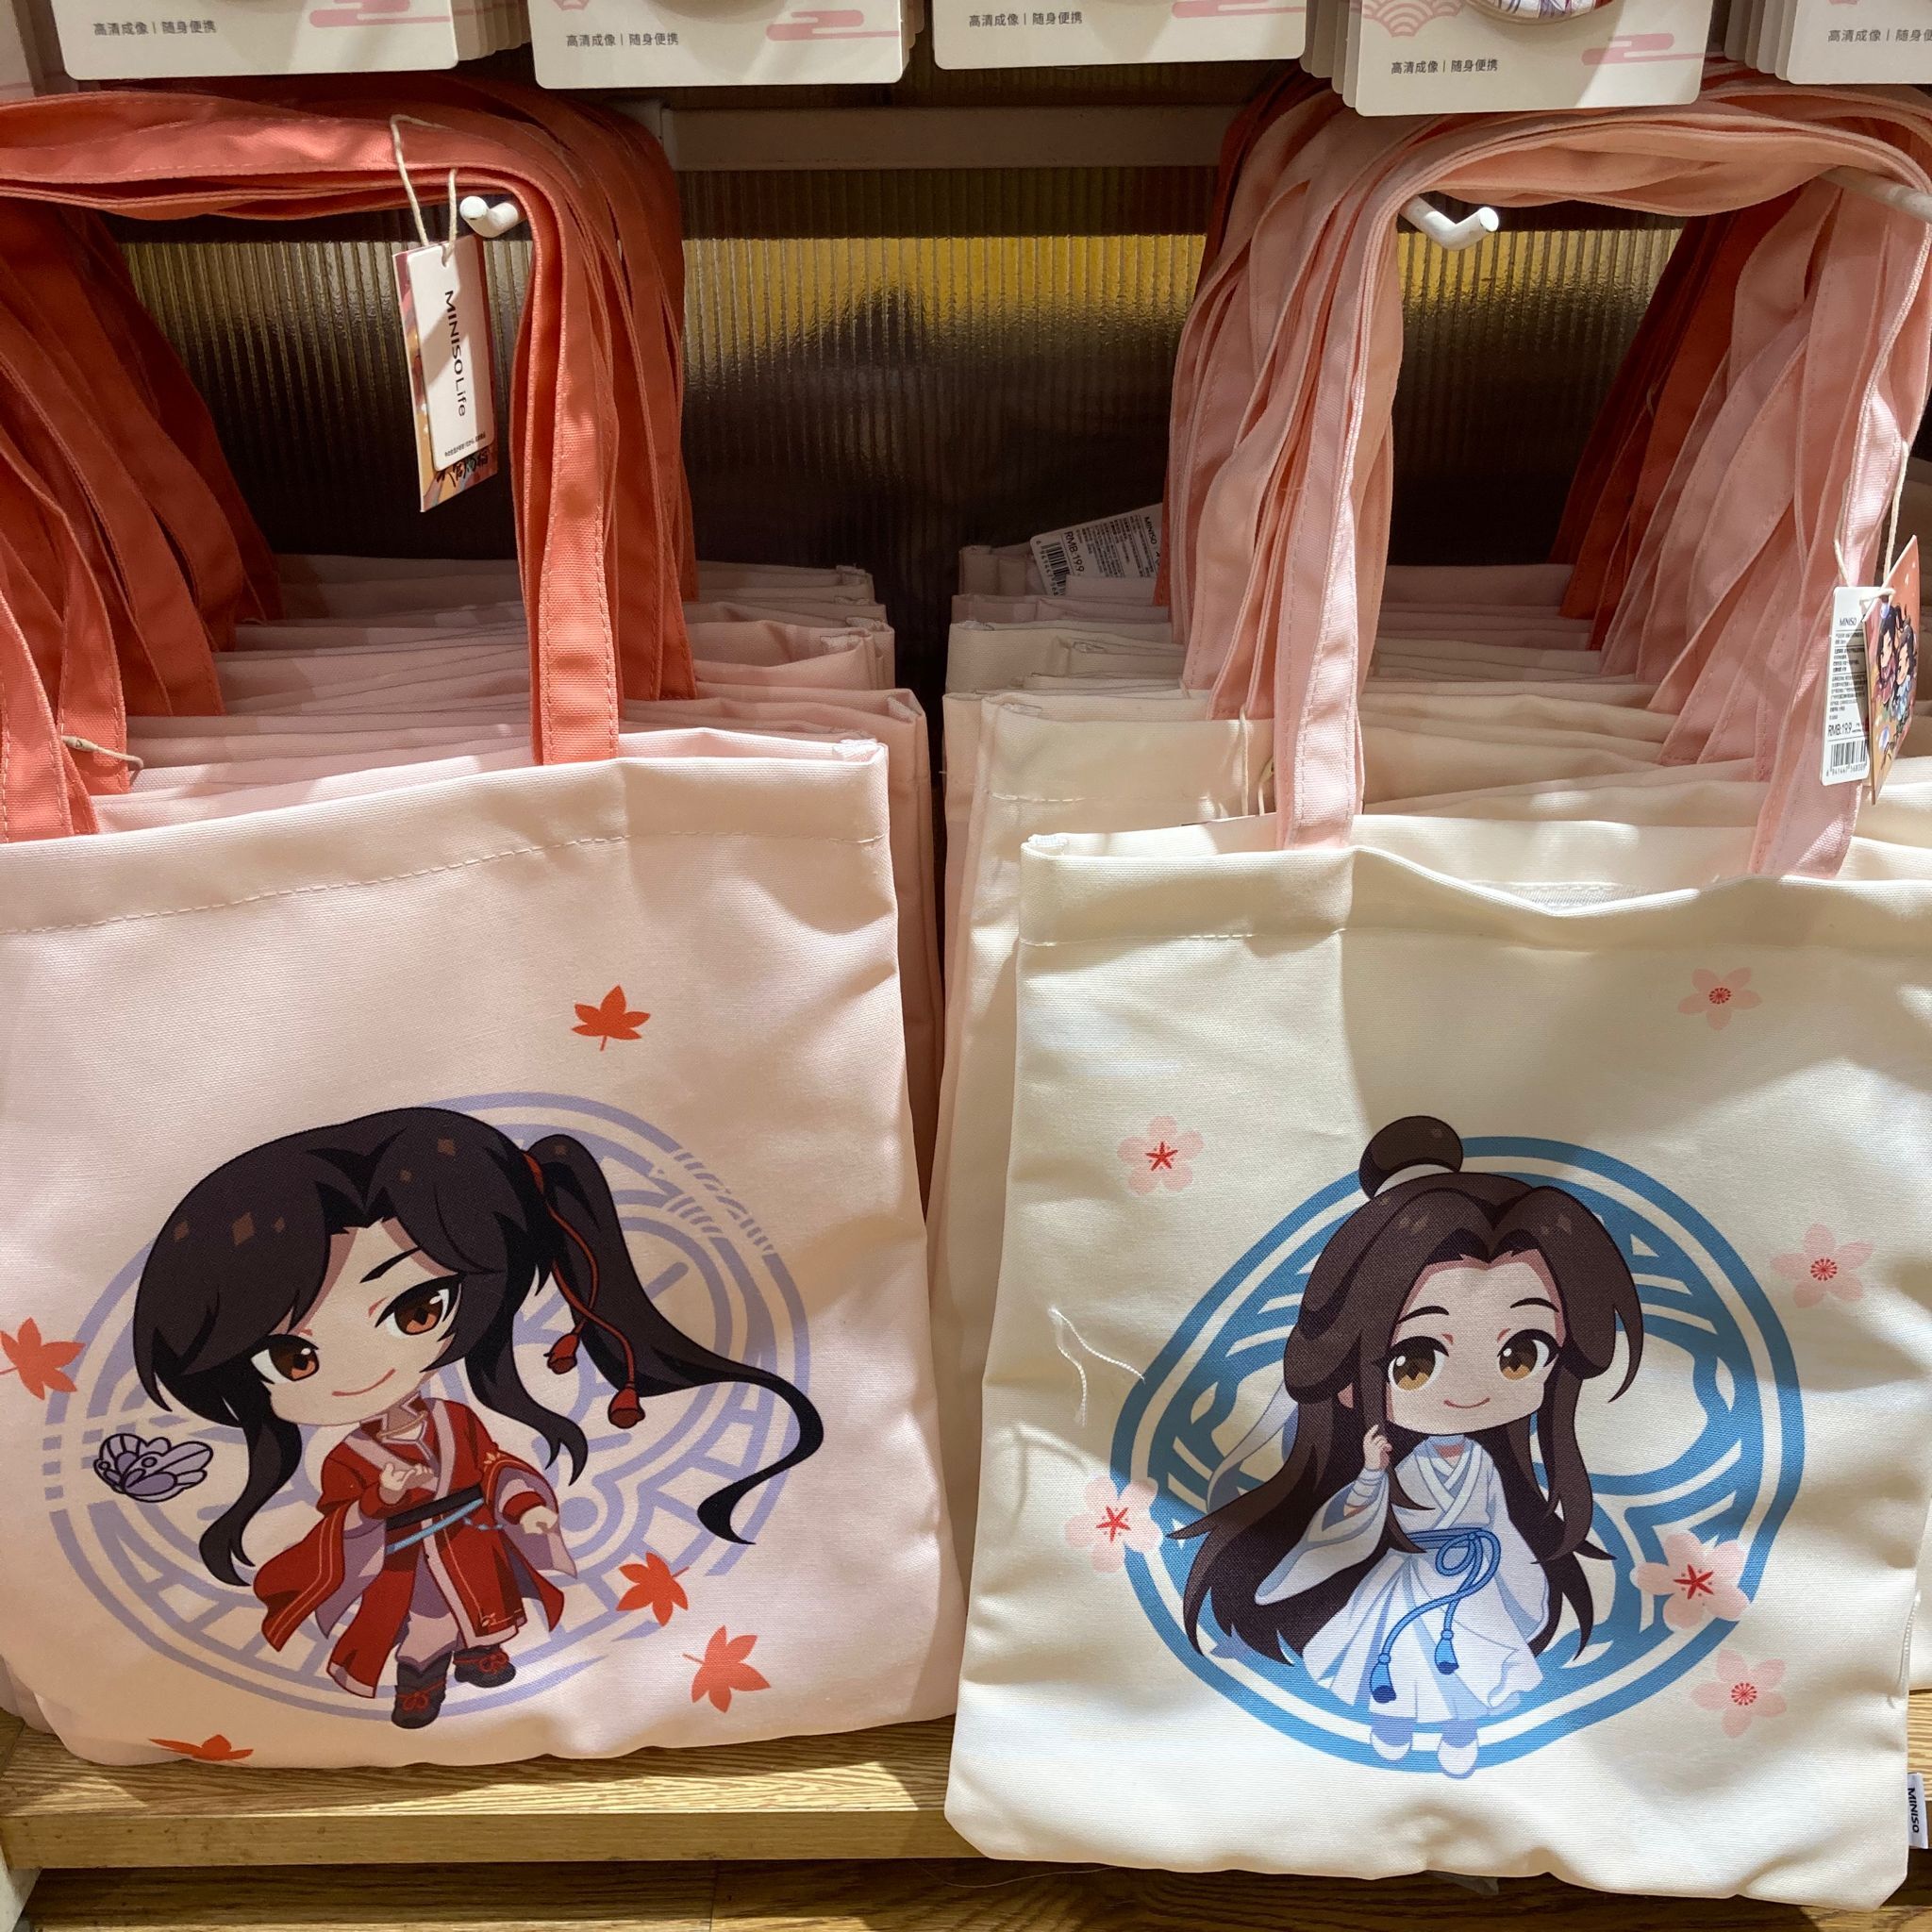 A Pair Of Canvas BagsMINISO miniso Blessing from heaven new pattern Shining laser Hand carry The single shoulder bag Shopping bag Flower City Thank you